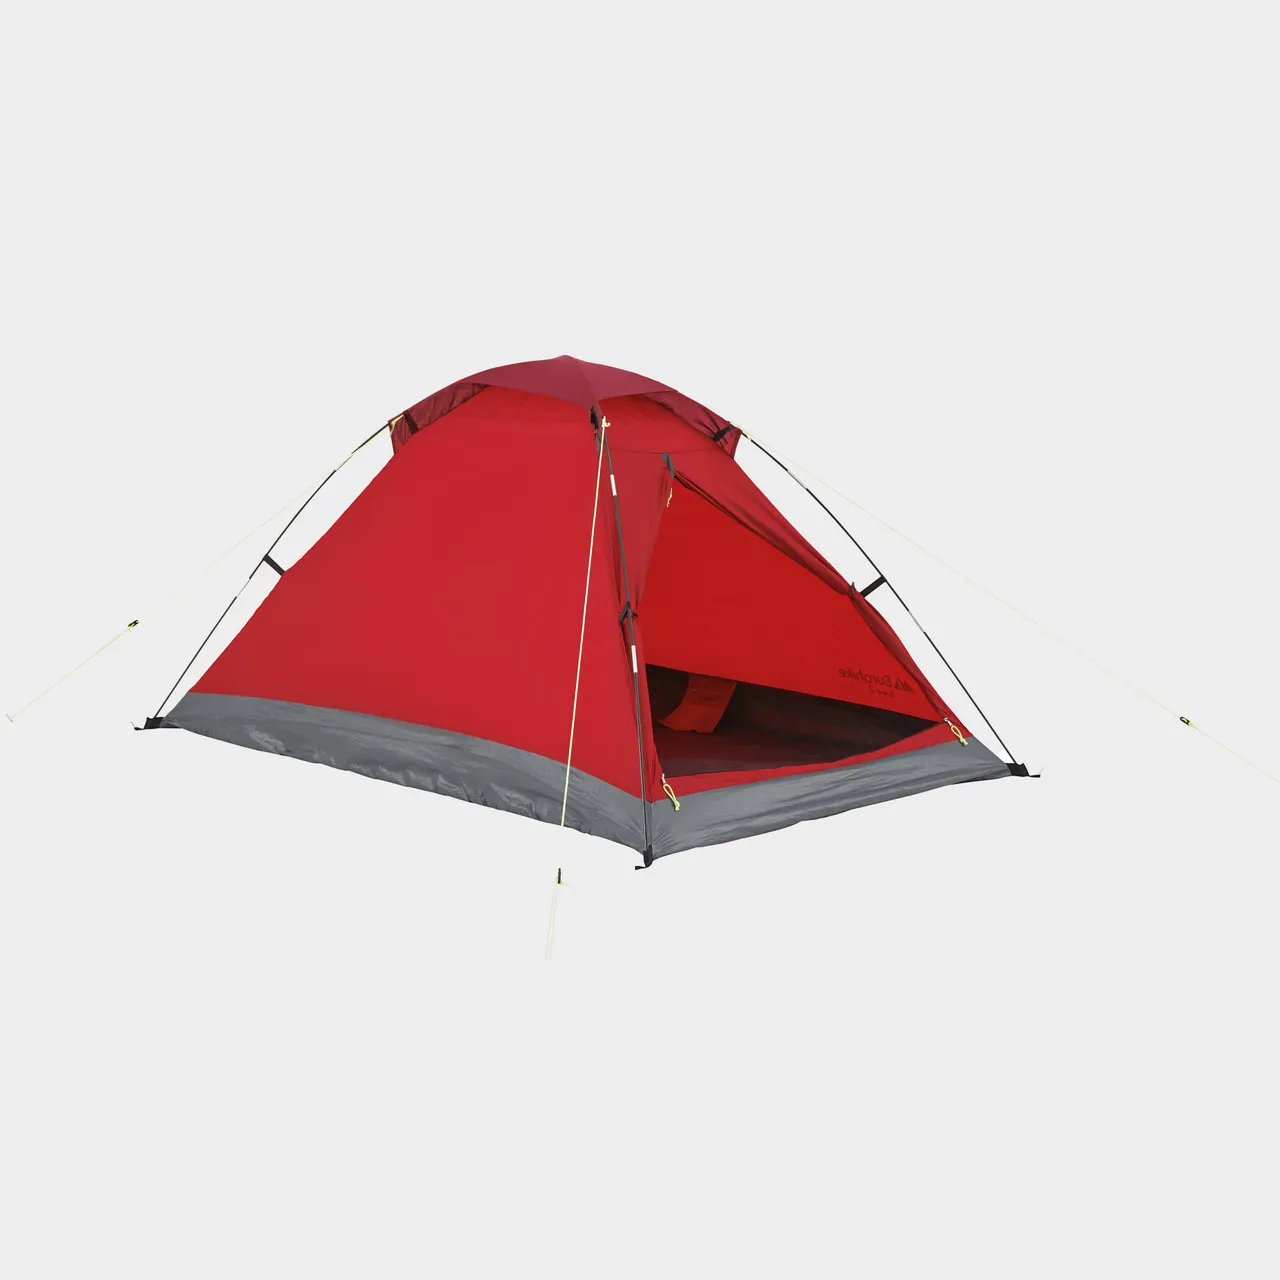 Toco 2 Dome Tent